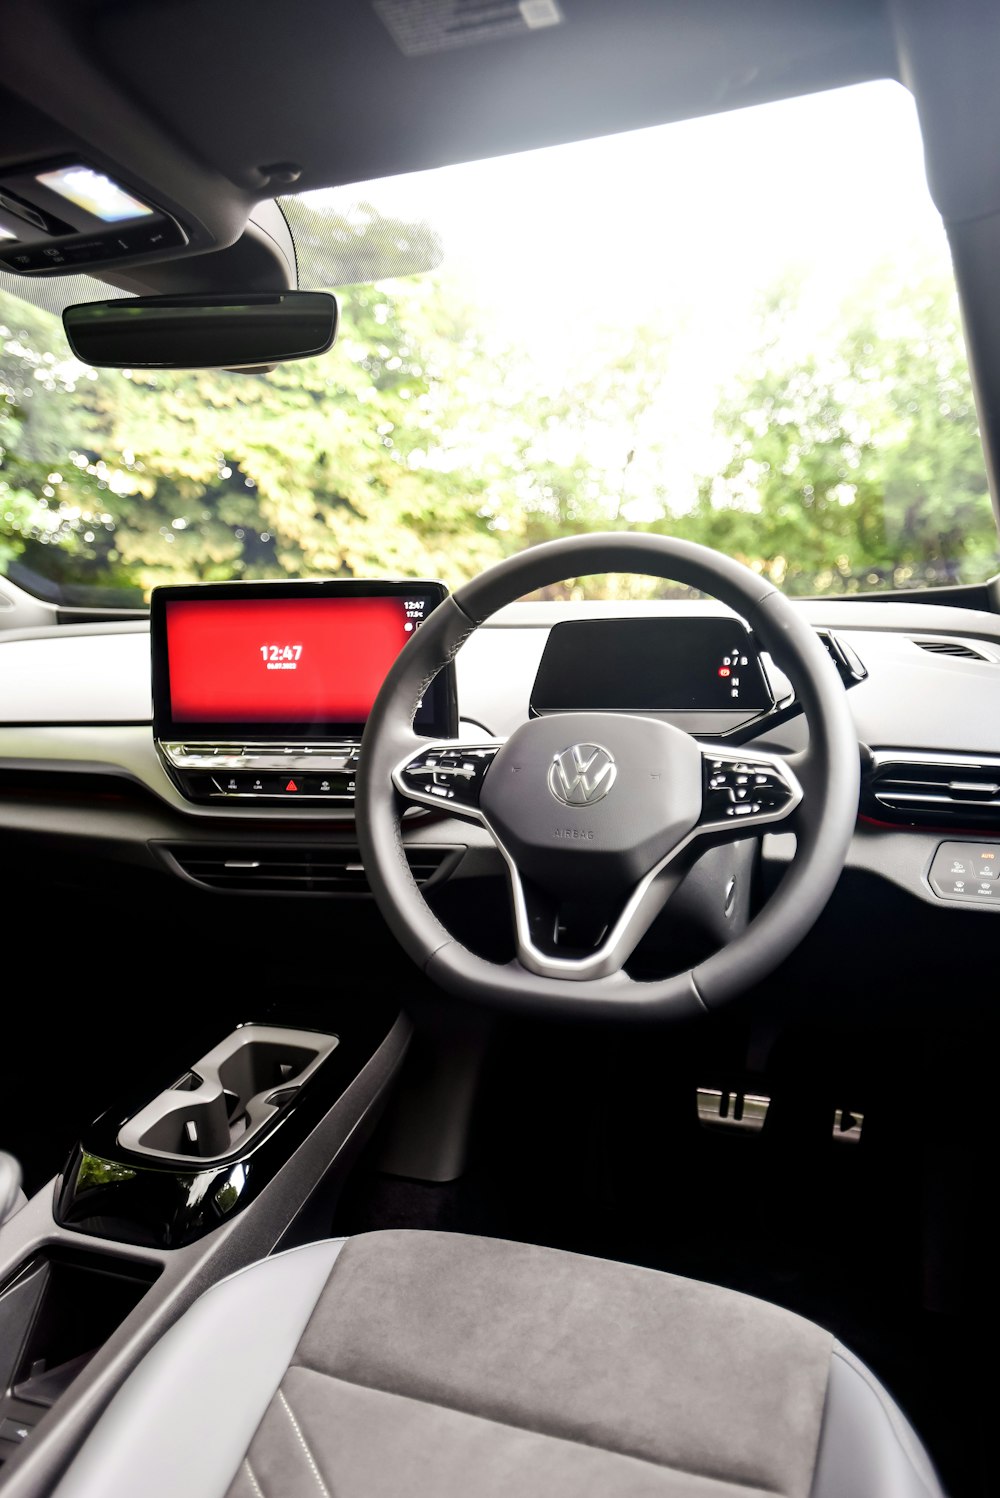 the interior of a car with a red screen